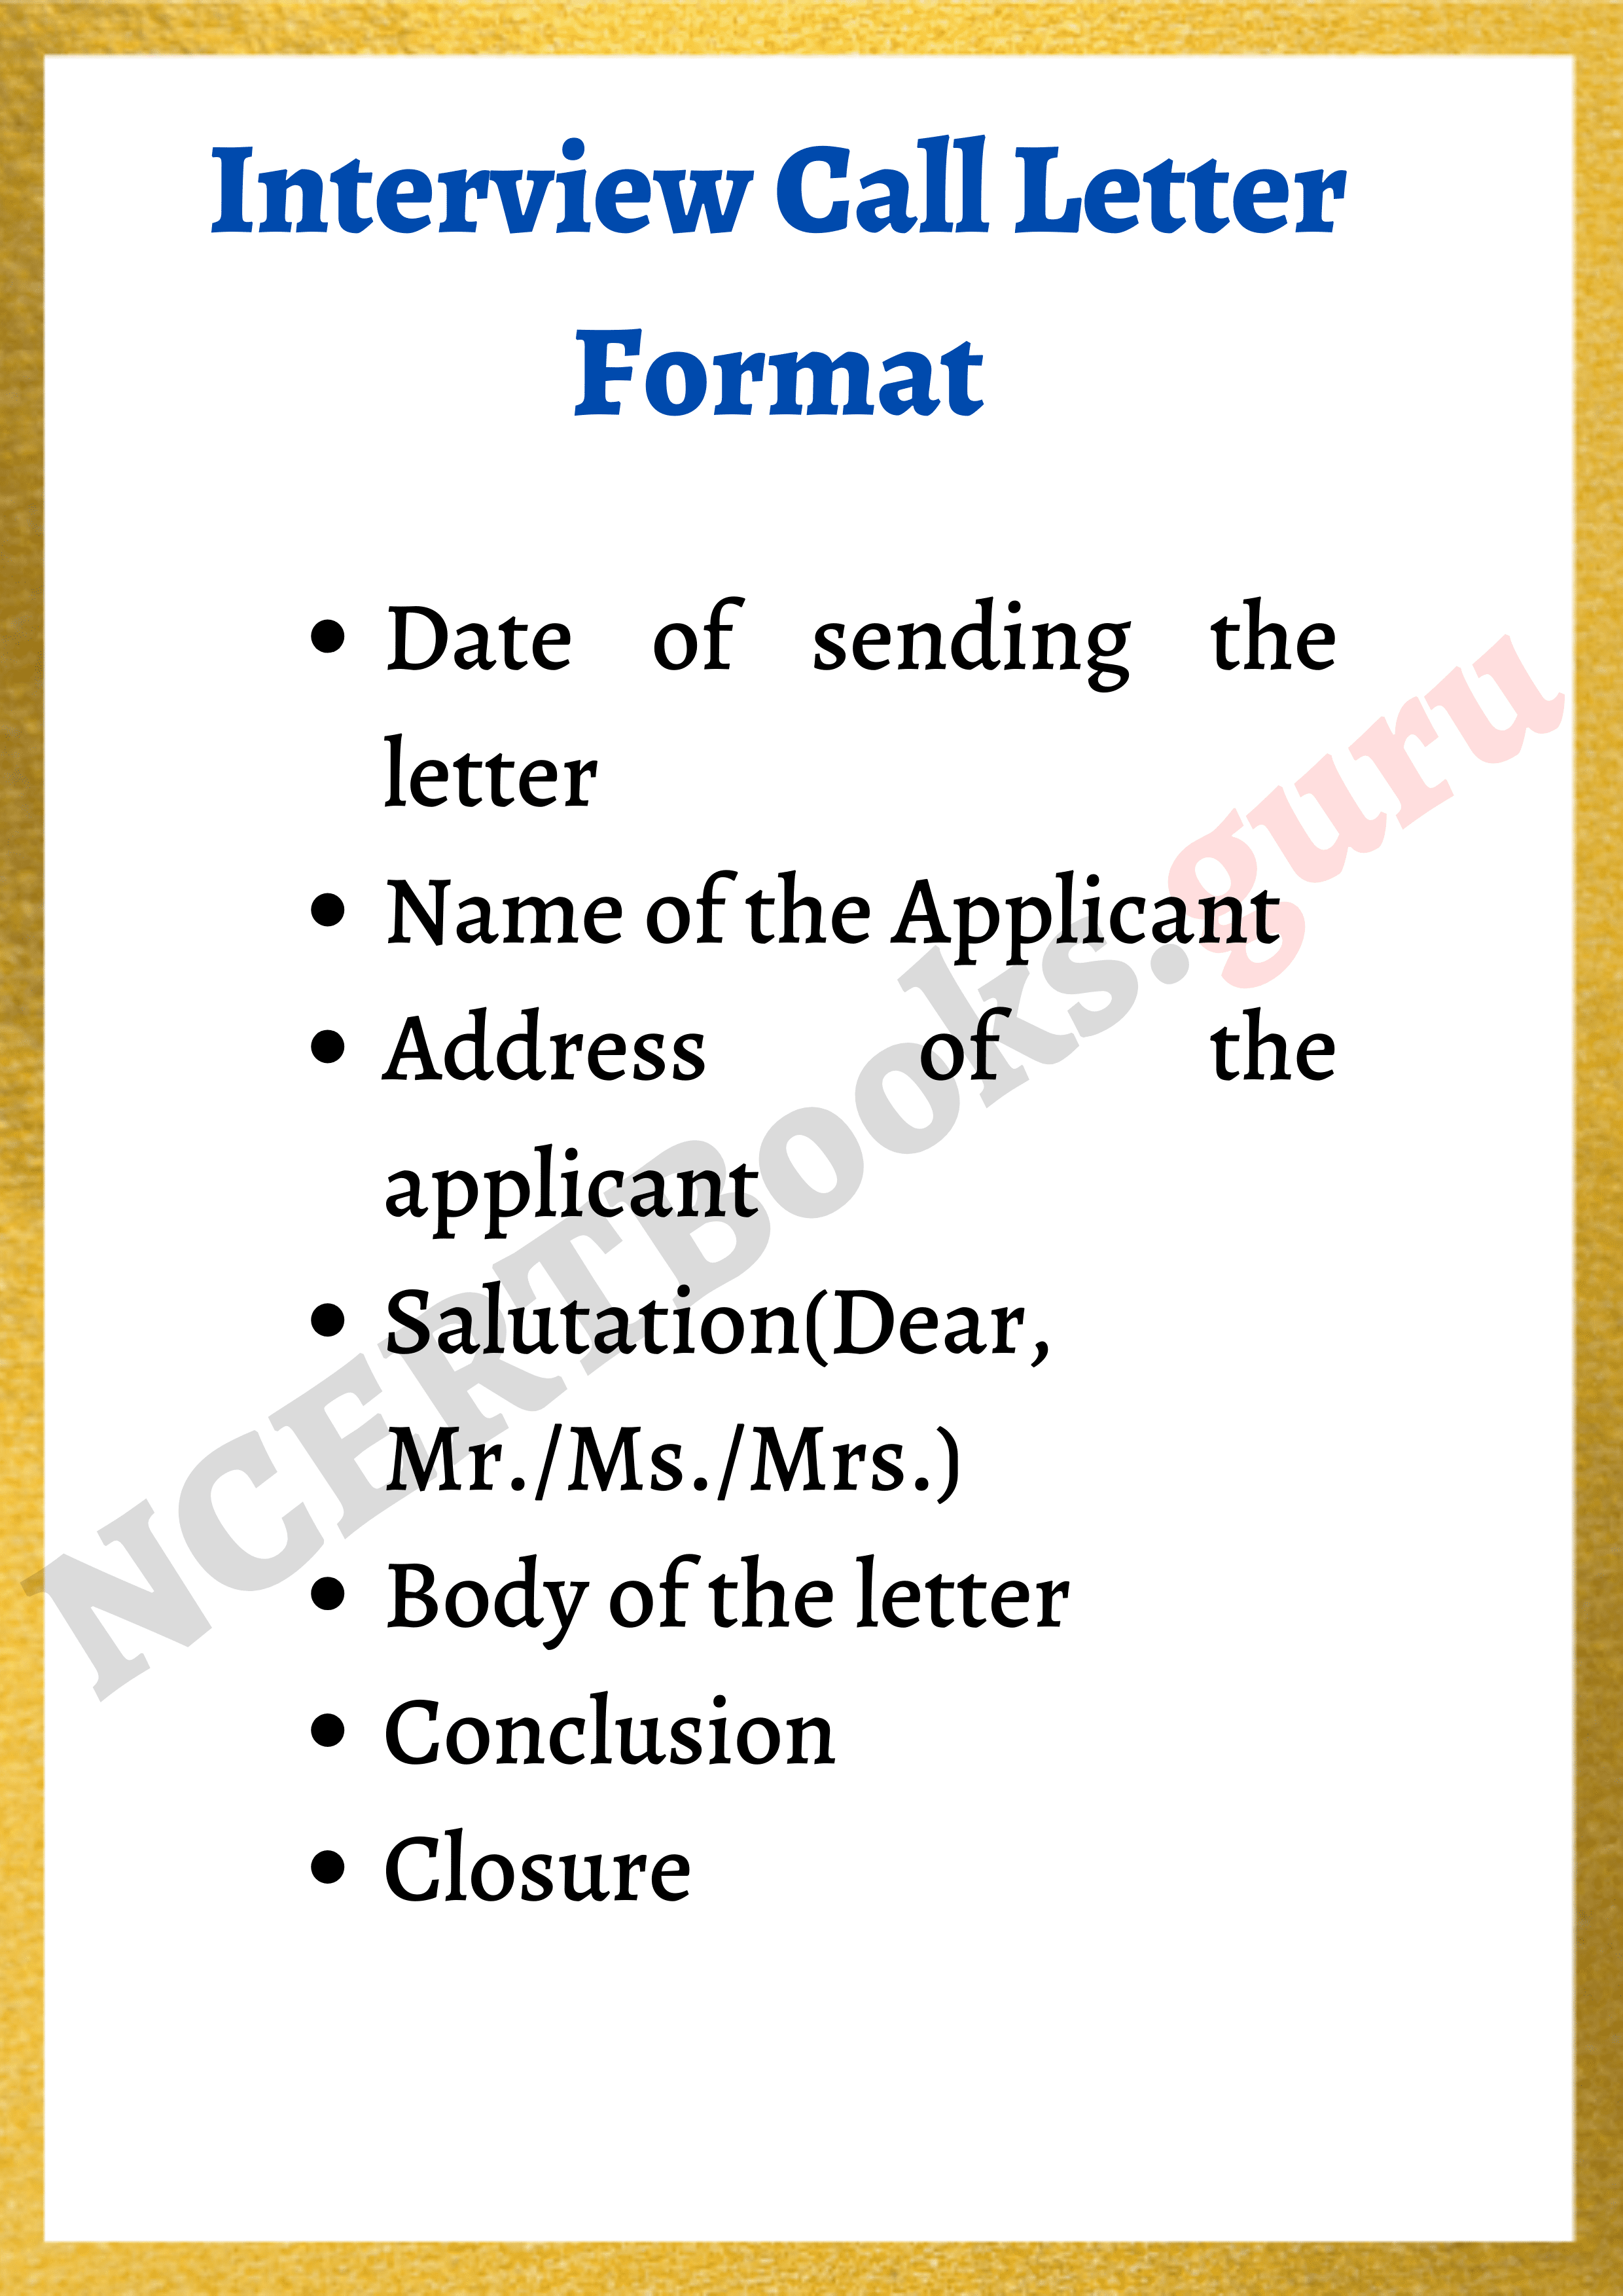 Interview Call Letter Format